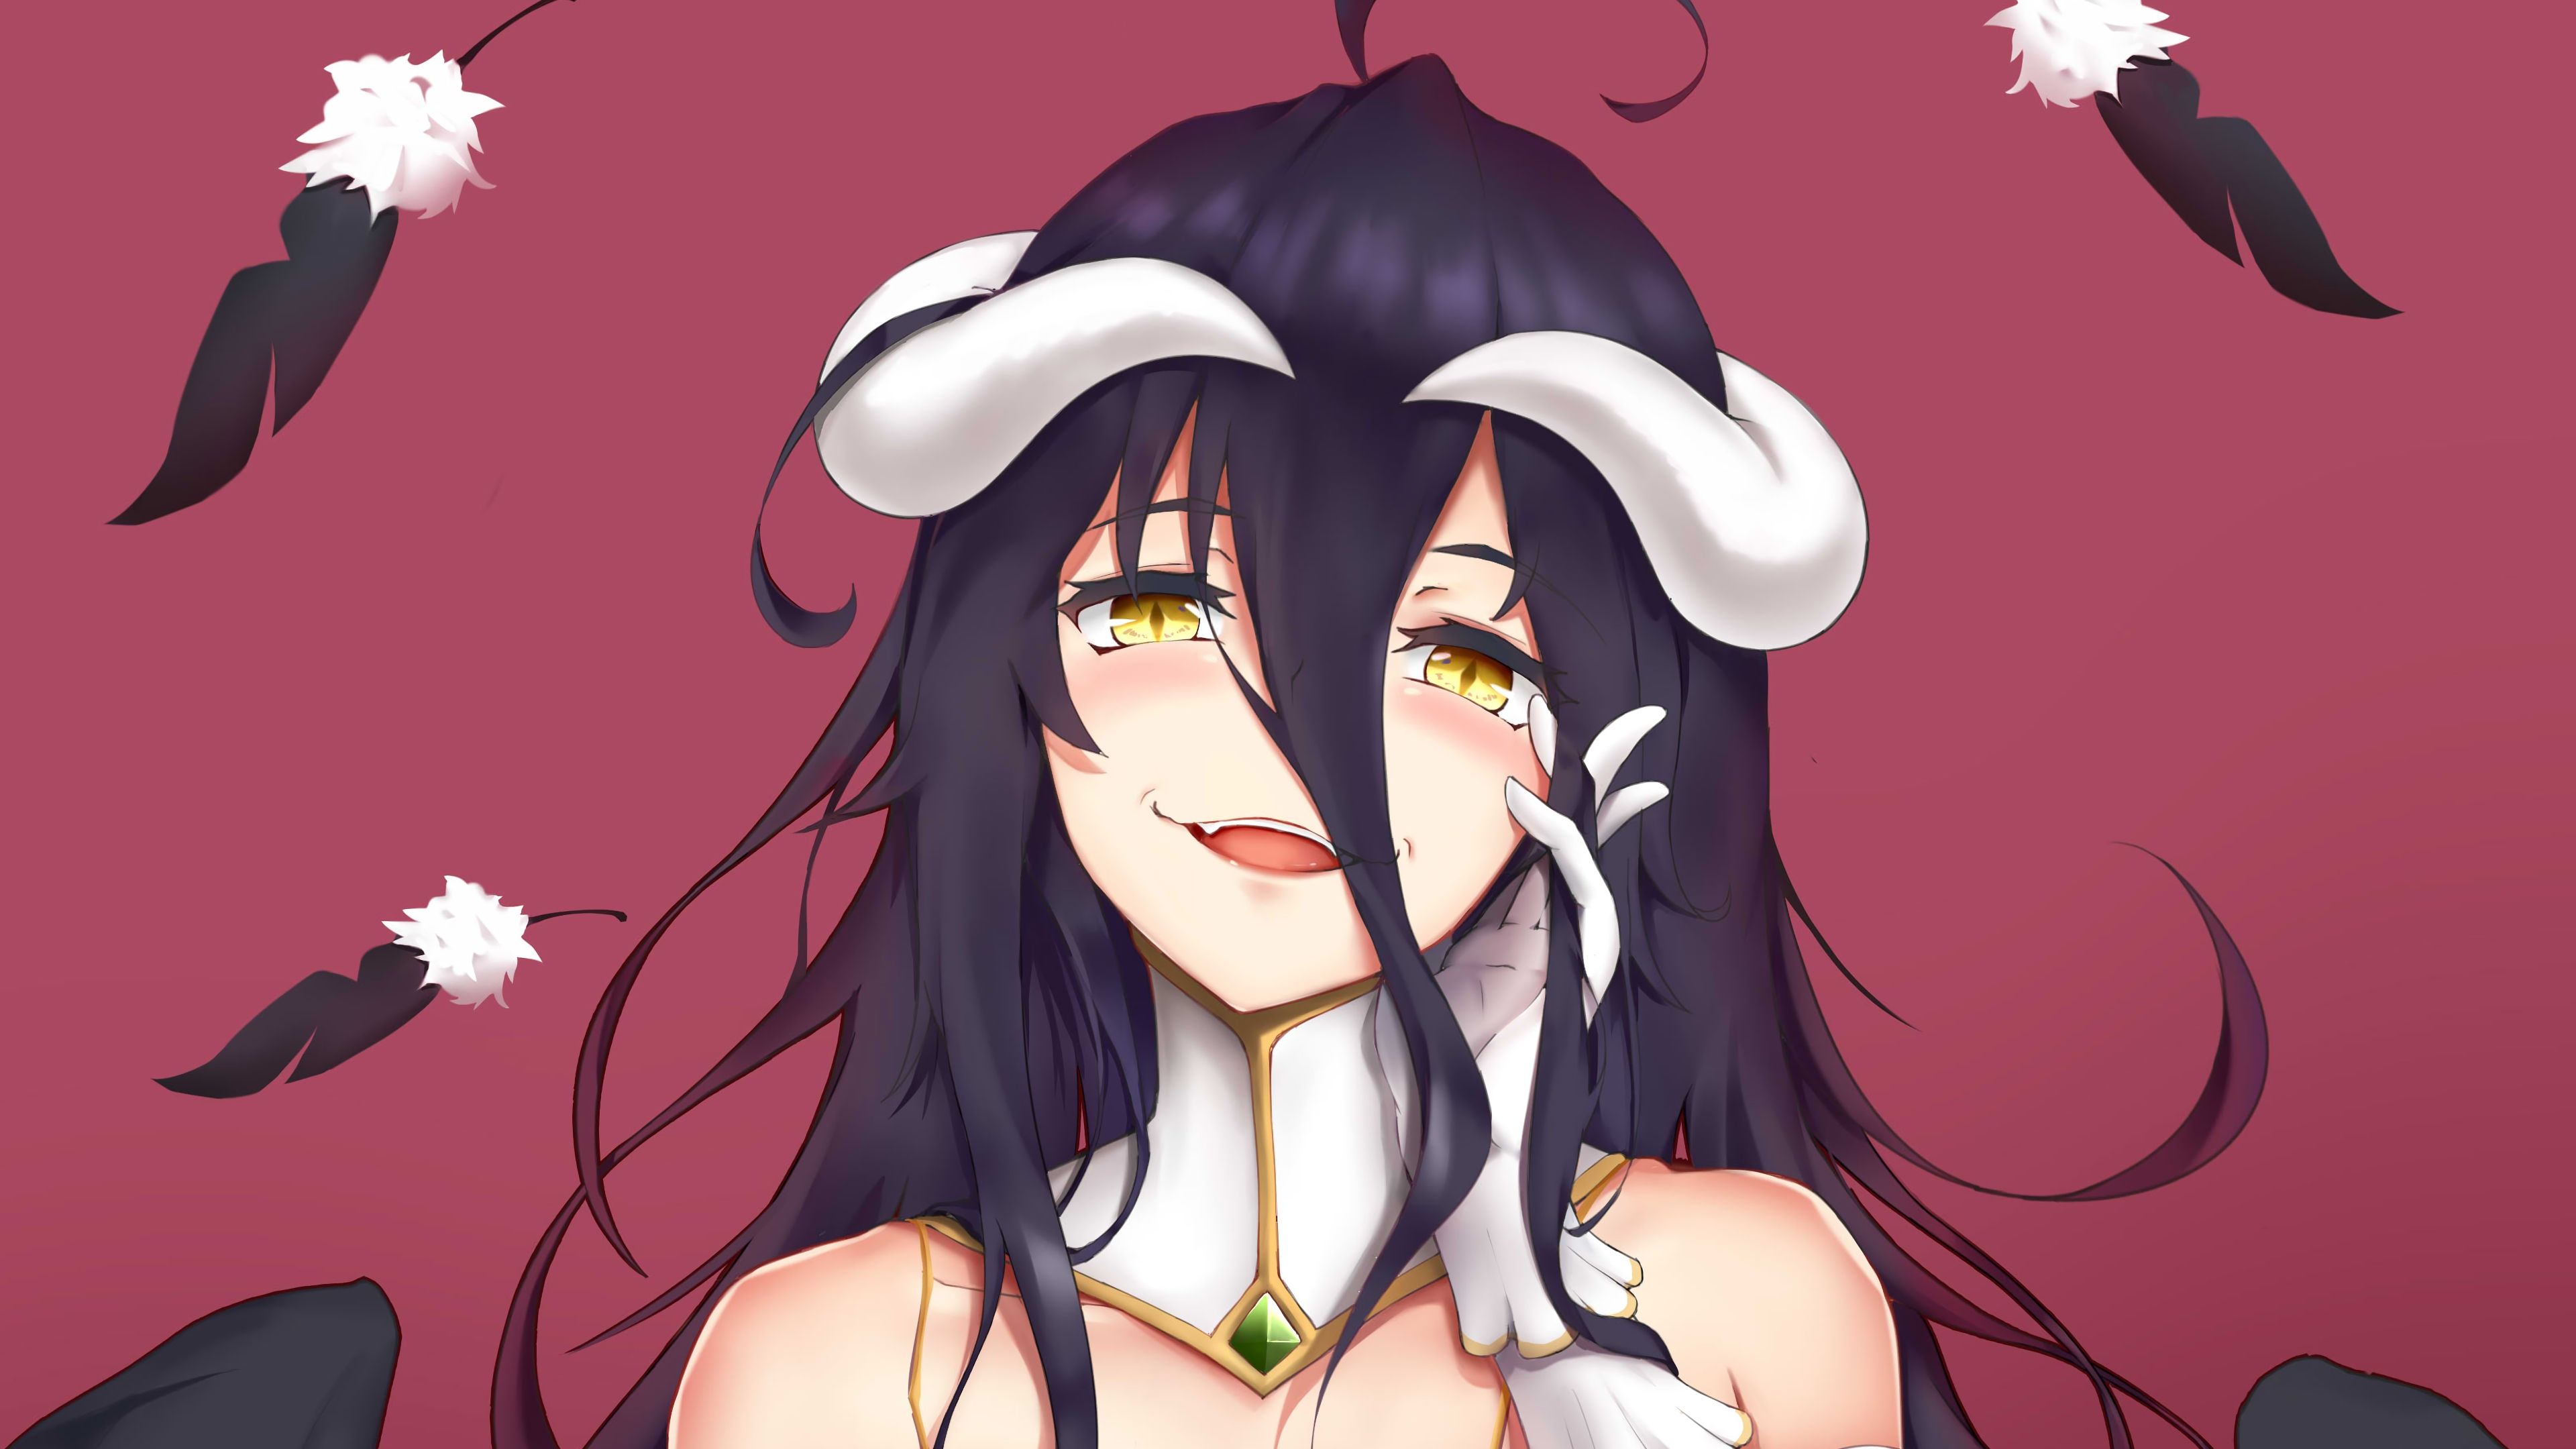 Albedo Overlord Wallpapers - Wallpaper Cave.